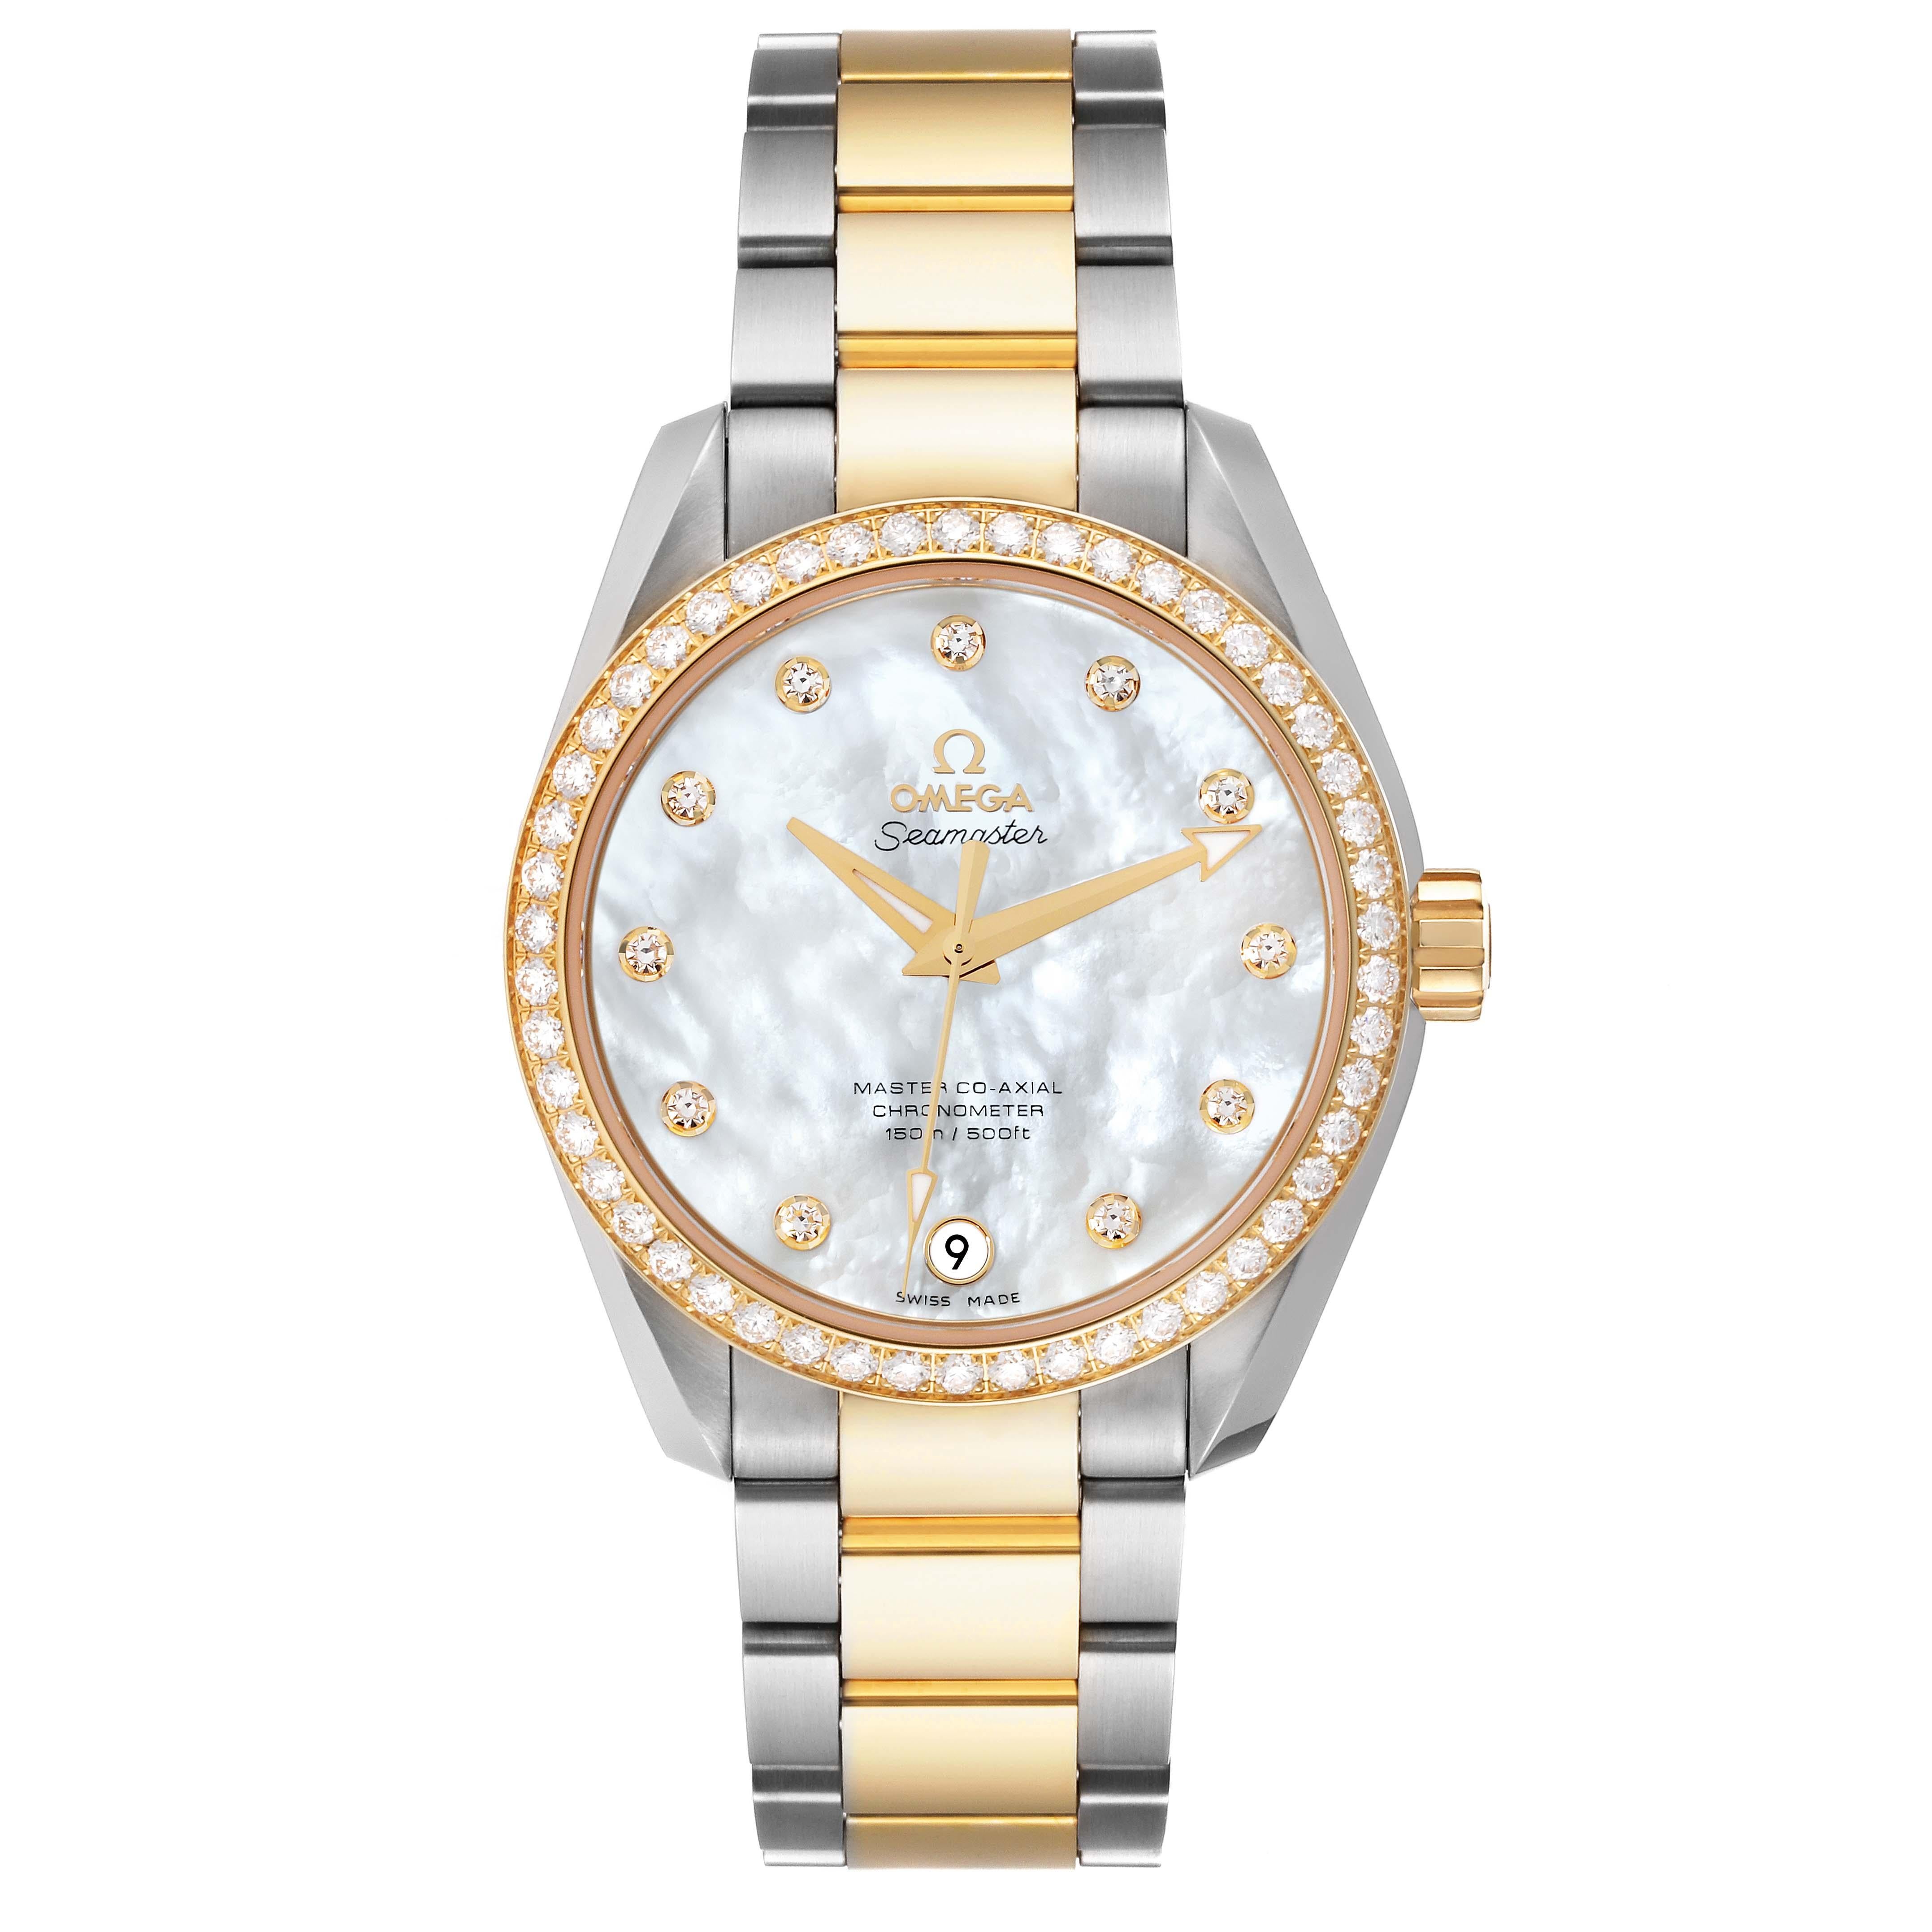 Omega Aqua Terra Steel Yellow Gold Diamond Watch 231.25.39.21.55.002 Unworn. Automatic self-winding movement. . Stainless steel round case 38.5 mm in diameter. Exhibition transparent sapphire crystal case back. 18k yellow gold bezel set with